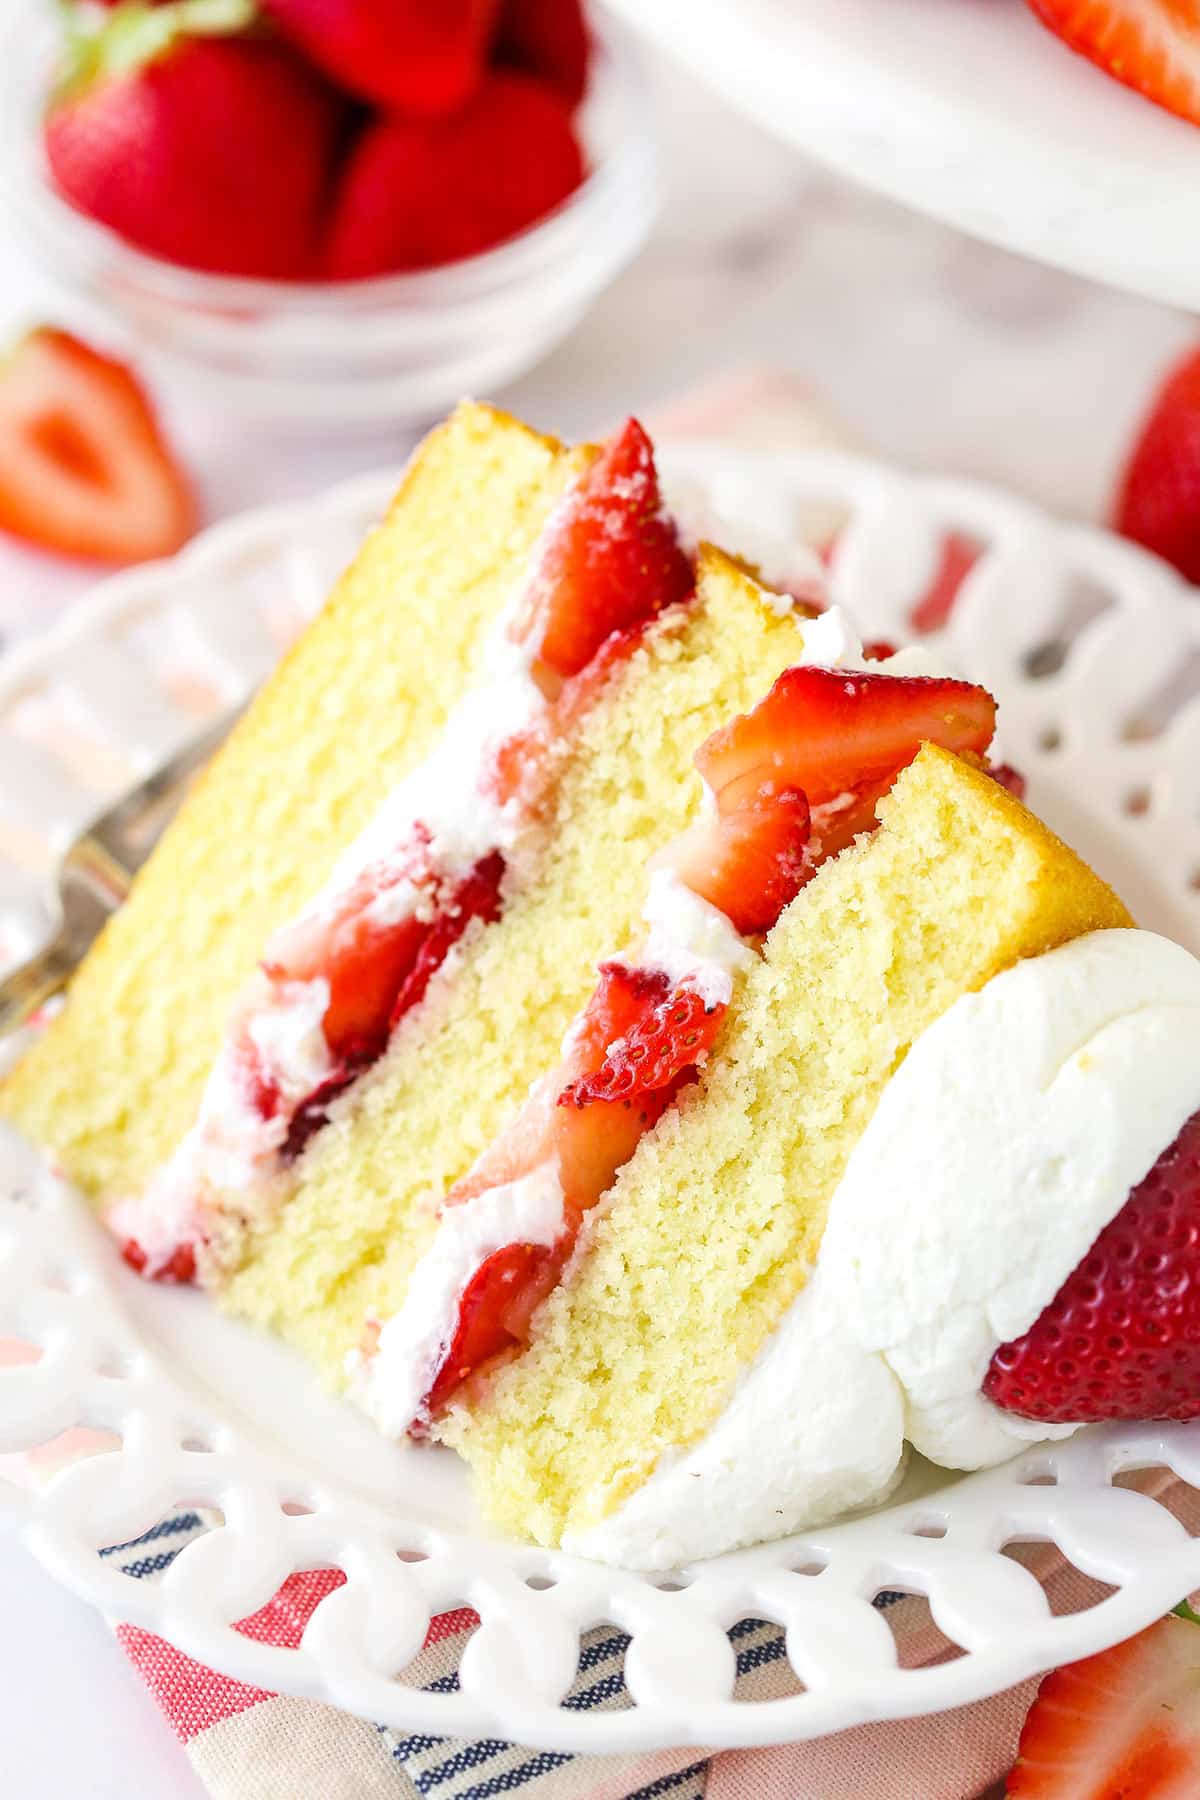 A slice of strawberry shortcake cake on a plate with a fork near fresh strawberries.